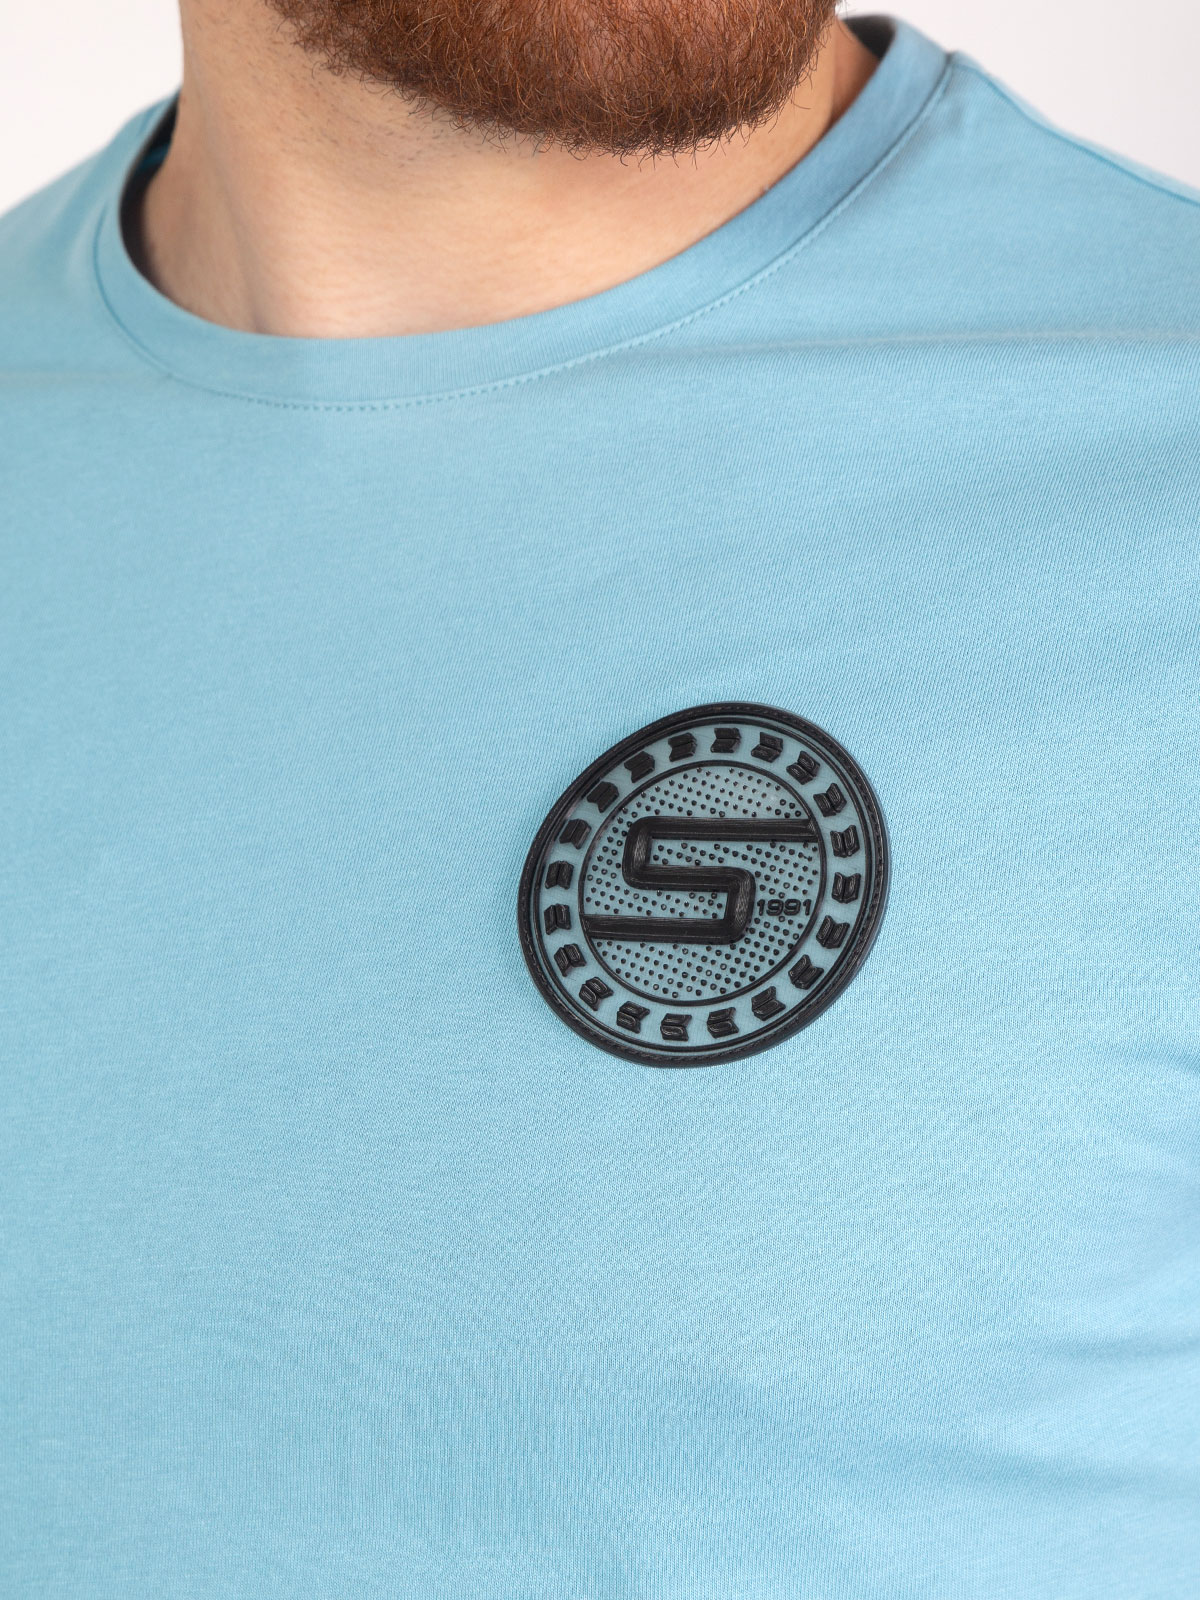 Light blue tshirt with a round patch - 96381 € 11.81 img4